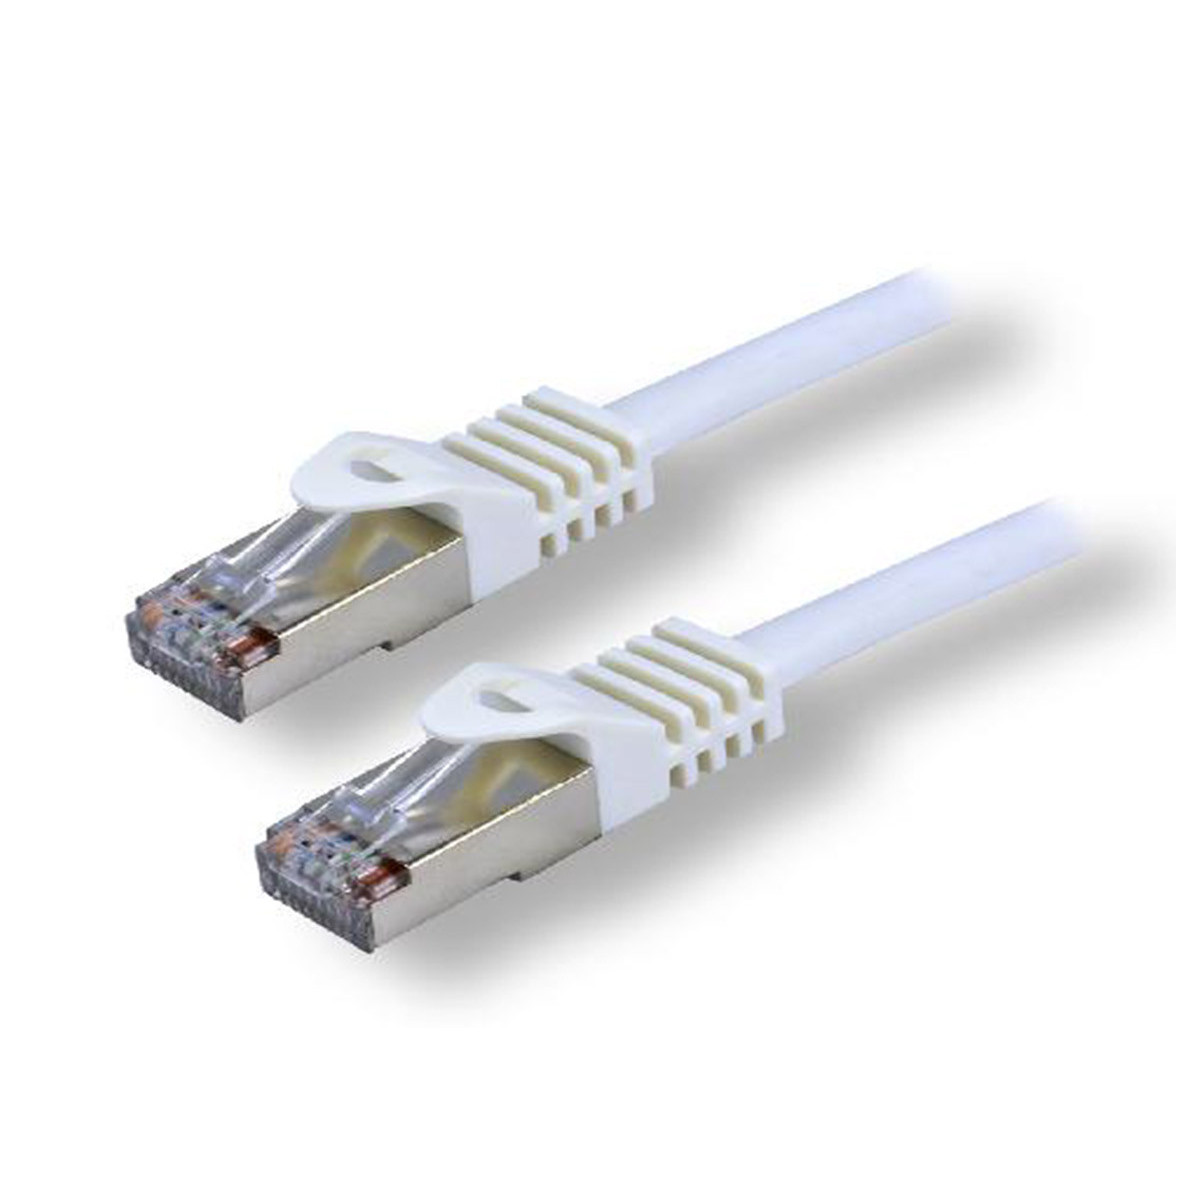 https://www.videoplusfrance.com/300423-product_full/cable-reseau-rj45-100-cuivre-cat-7-s-ftp-15m-blanc.jpg